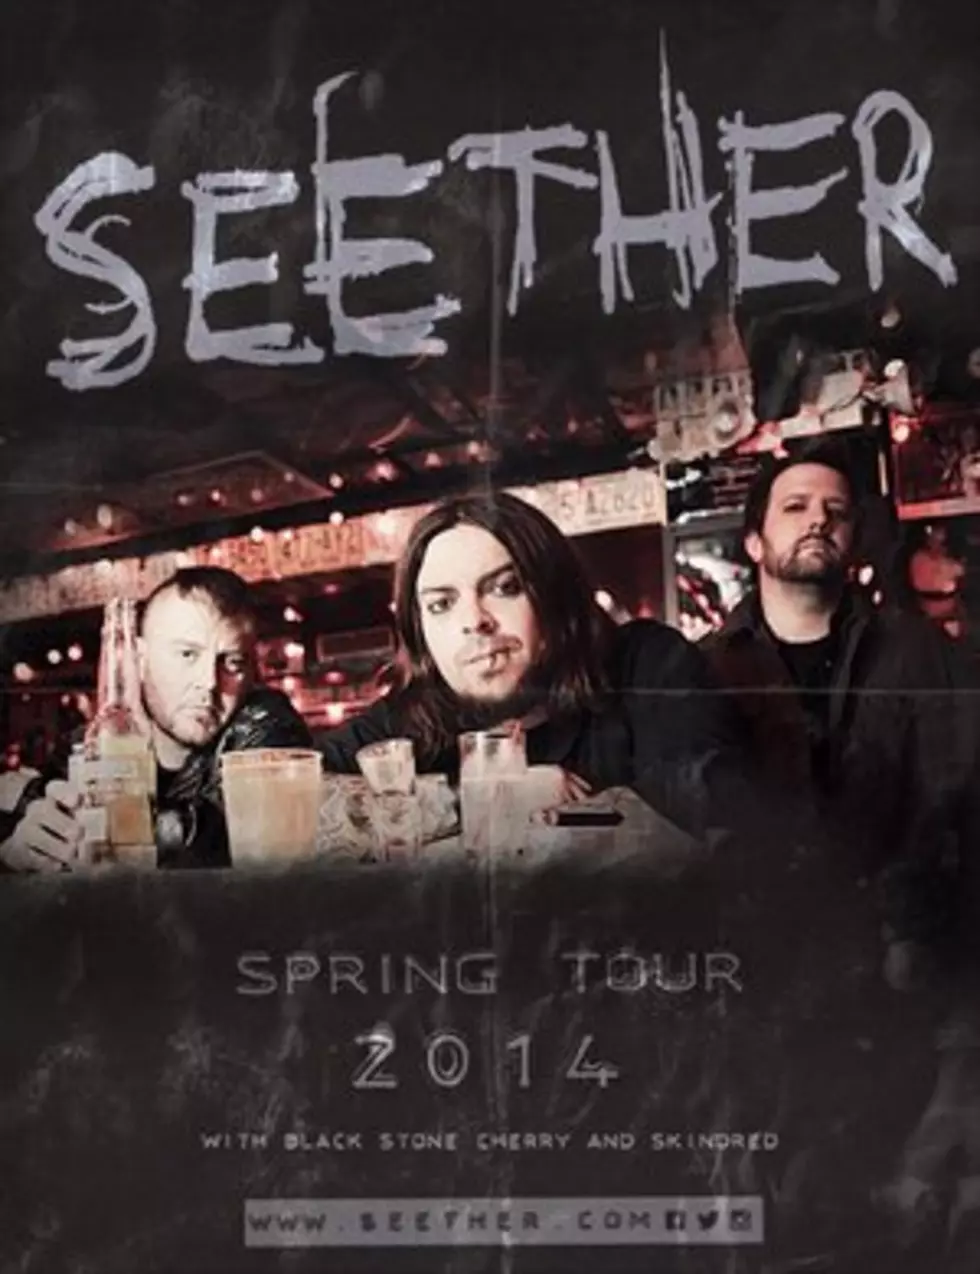 Seether Unveil Dates for Spring 2014 Headlining Tour With Black Stone Cherry + Skindred